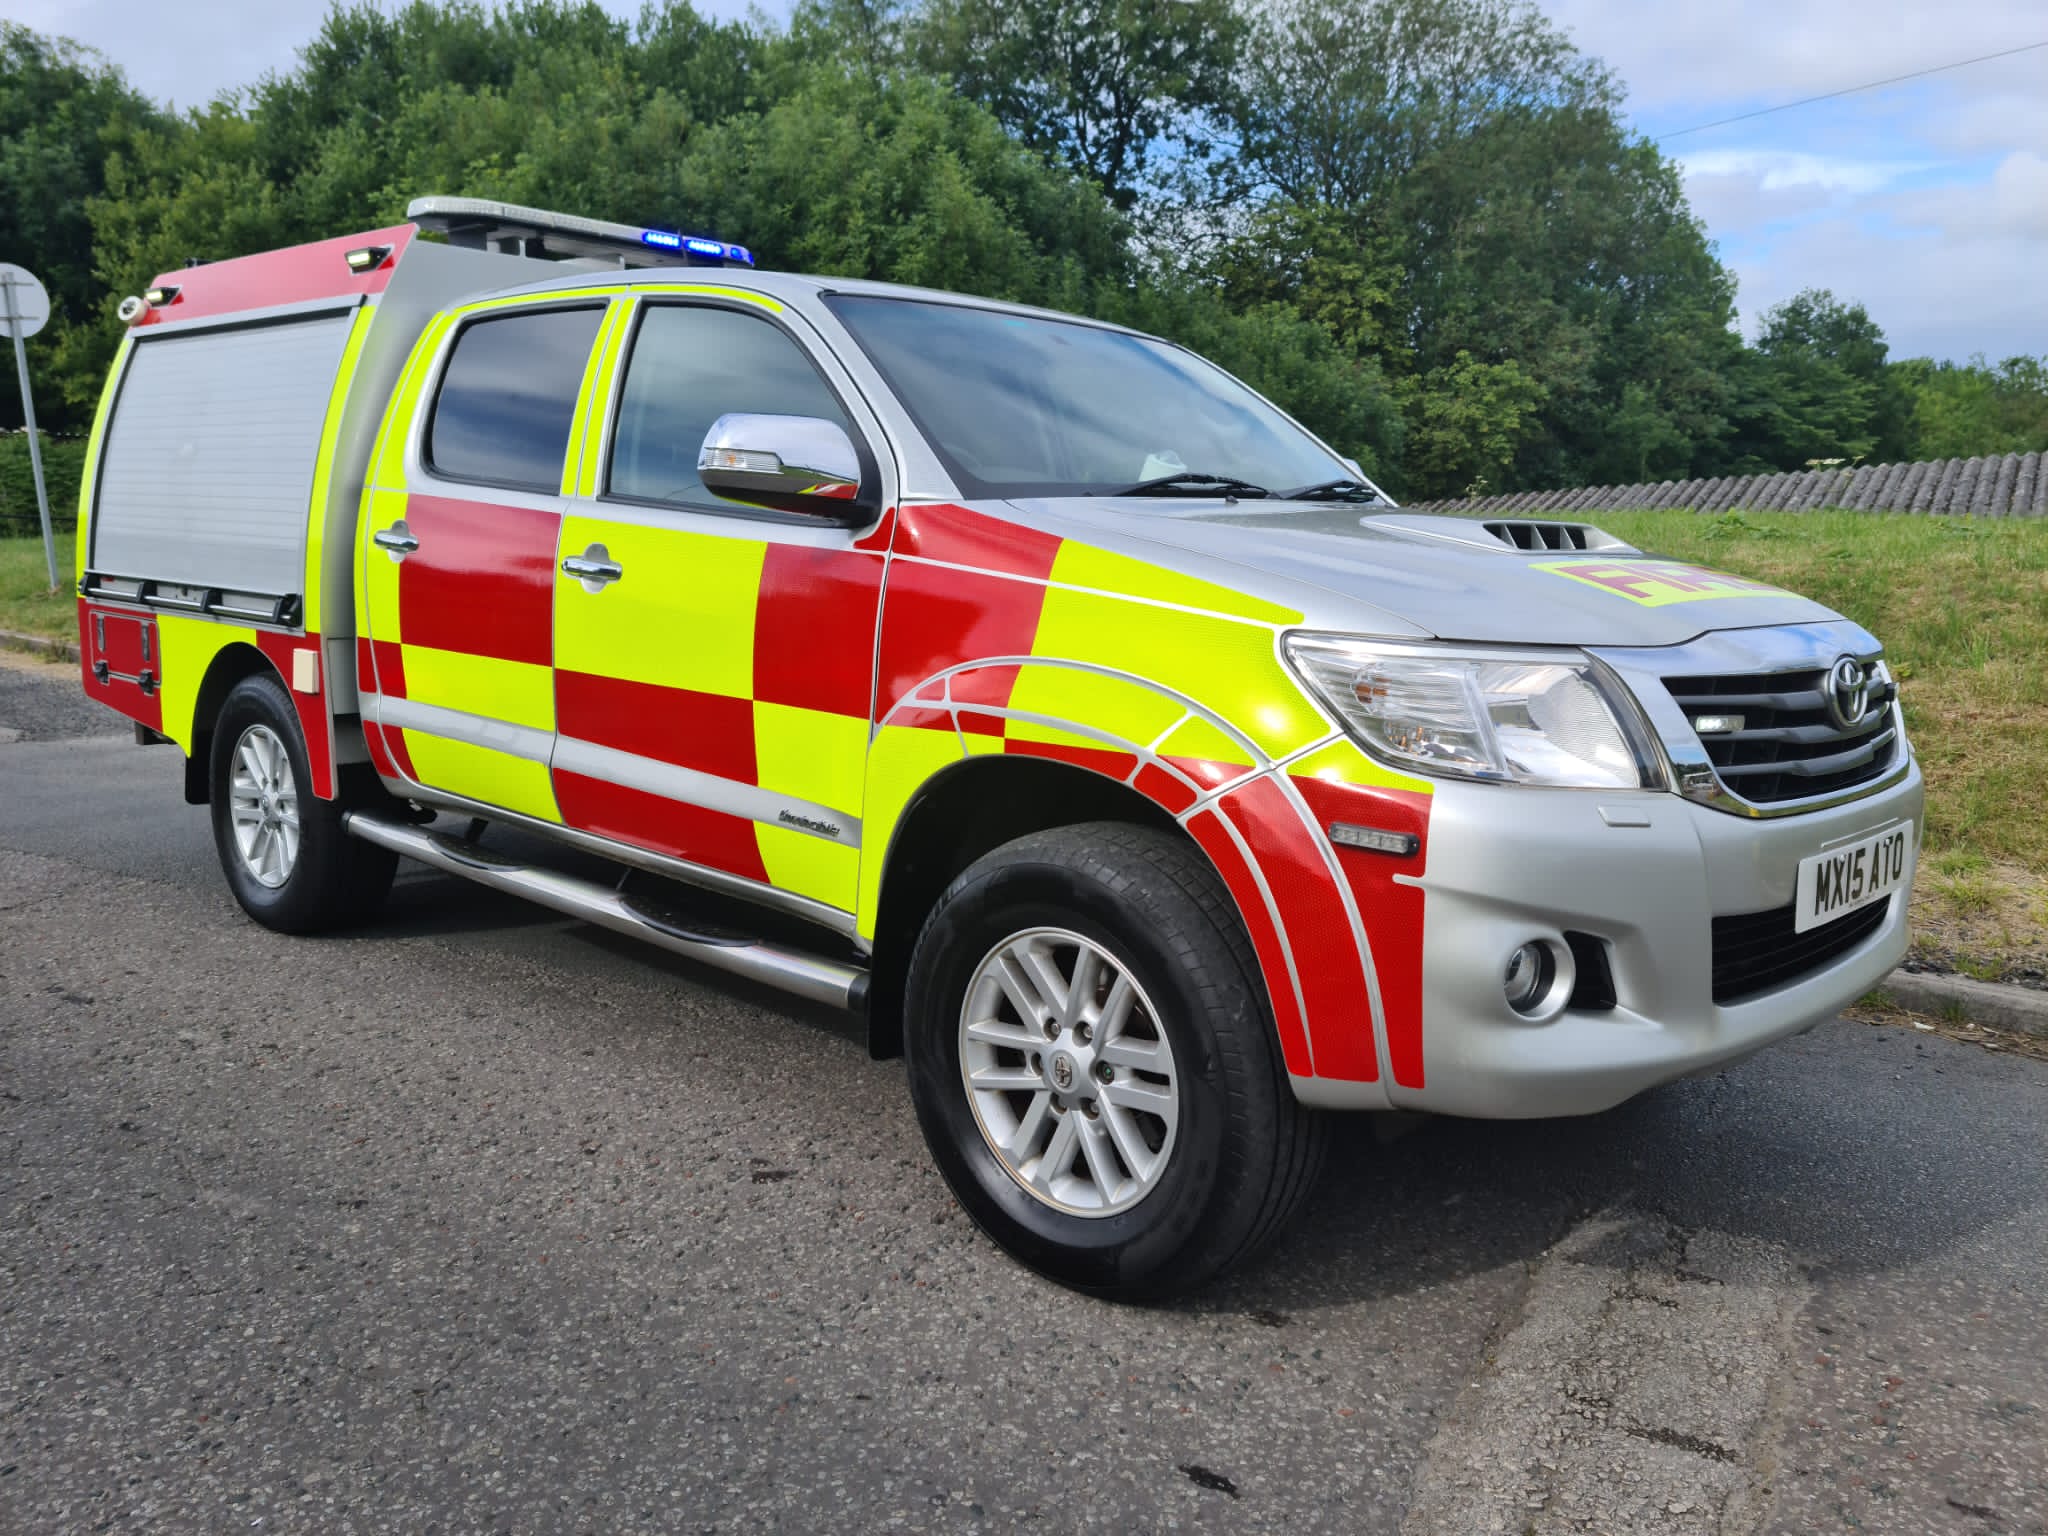 Evems.com - Fire Engines for Sale - <a href='/index.php/evems-hilux/248-toyota-hilux-crew-cab-fire-engine' title='Read more...' class='joodb_titletink'>Toyota Hilux Crew Cab Fire Engine</a>